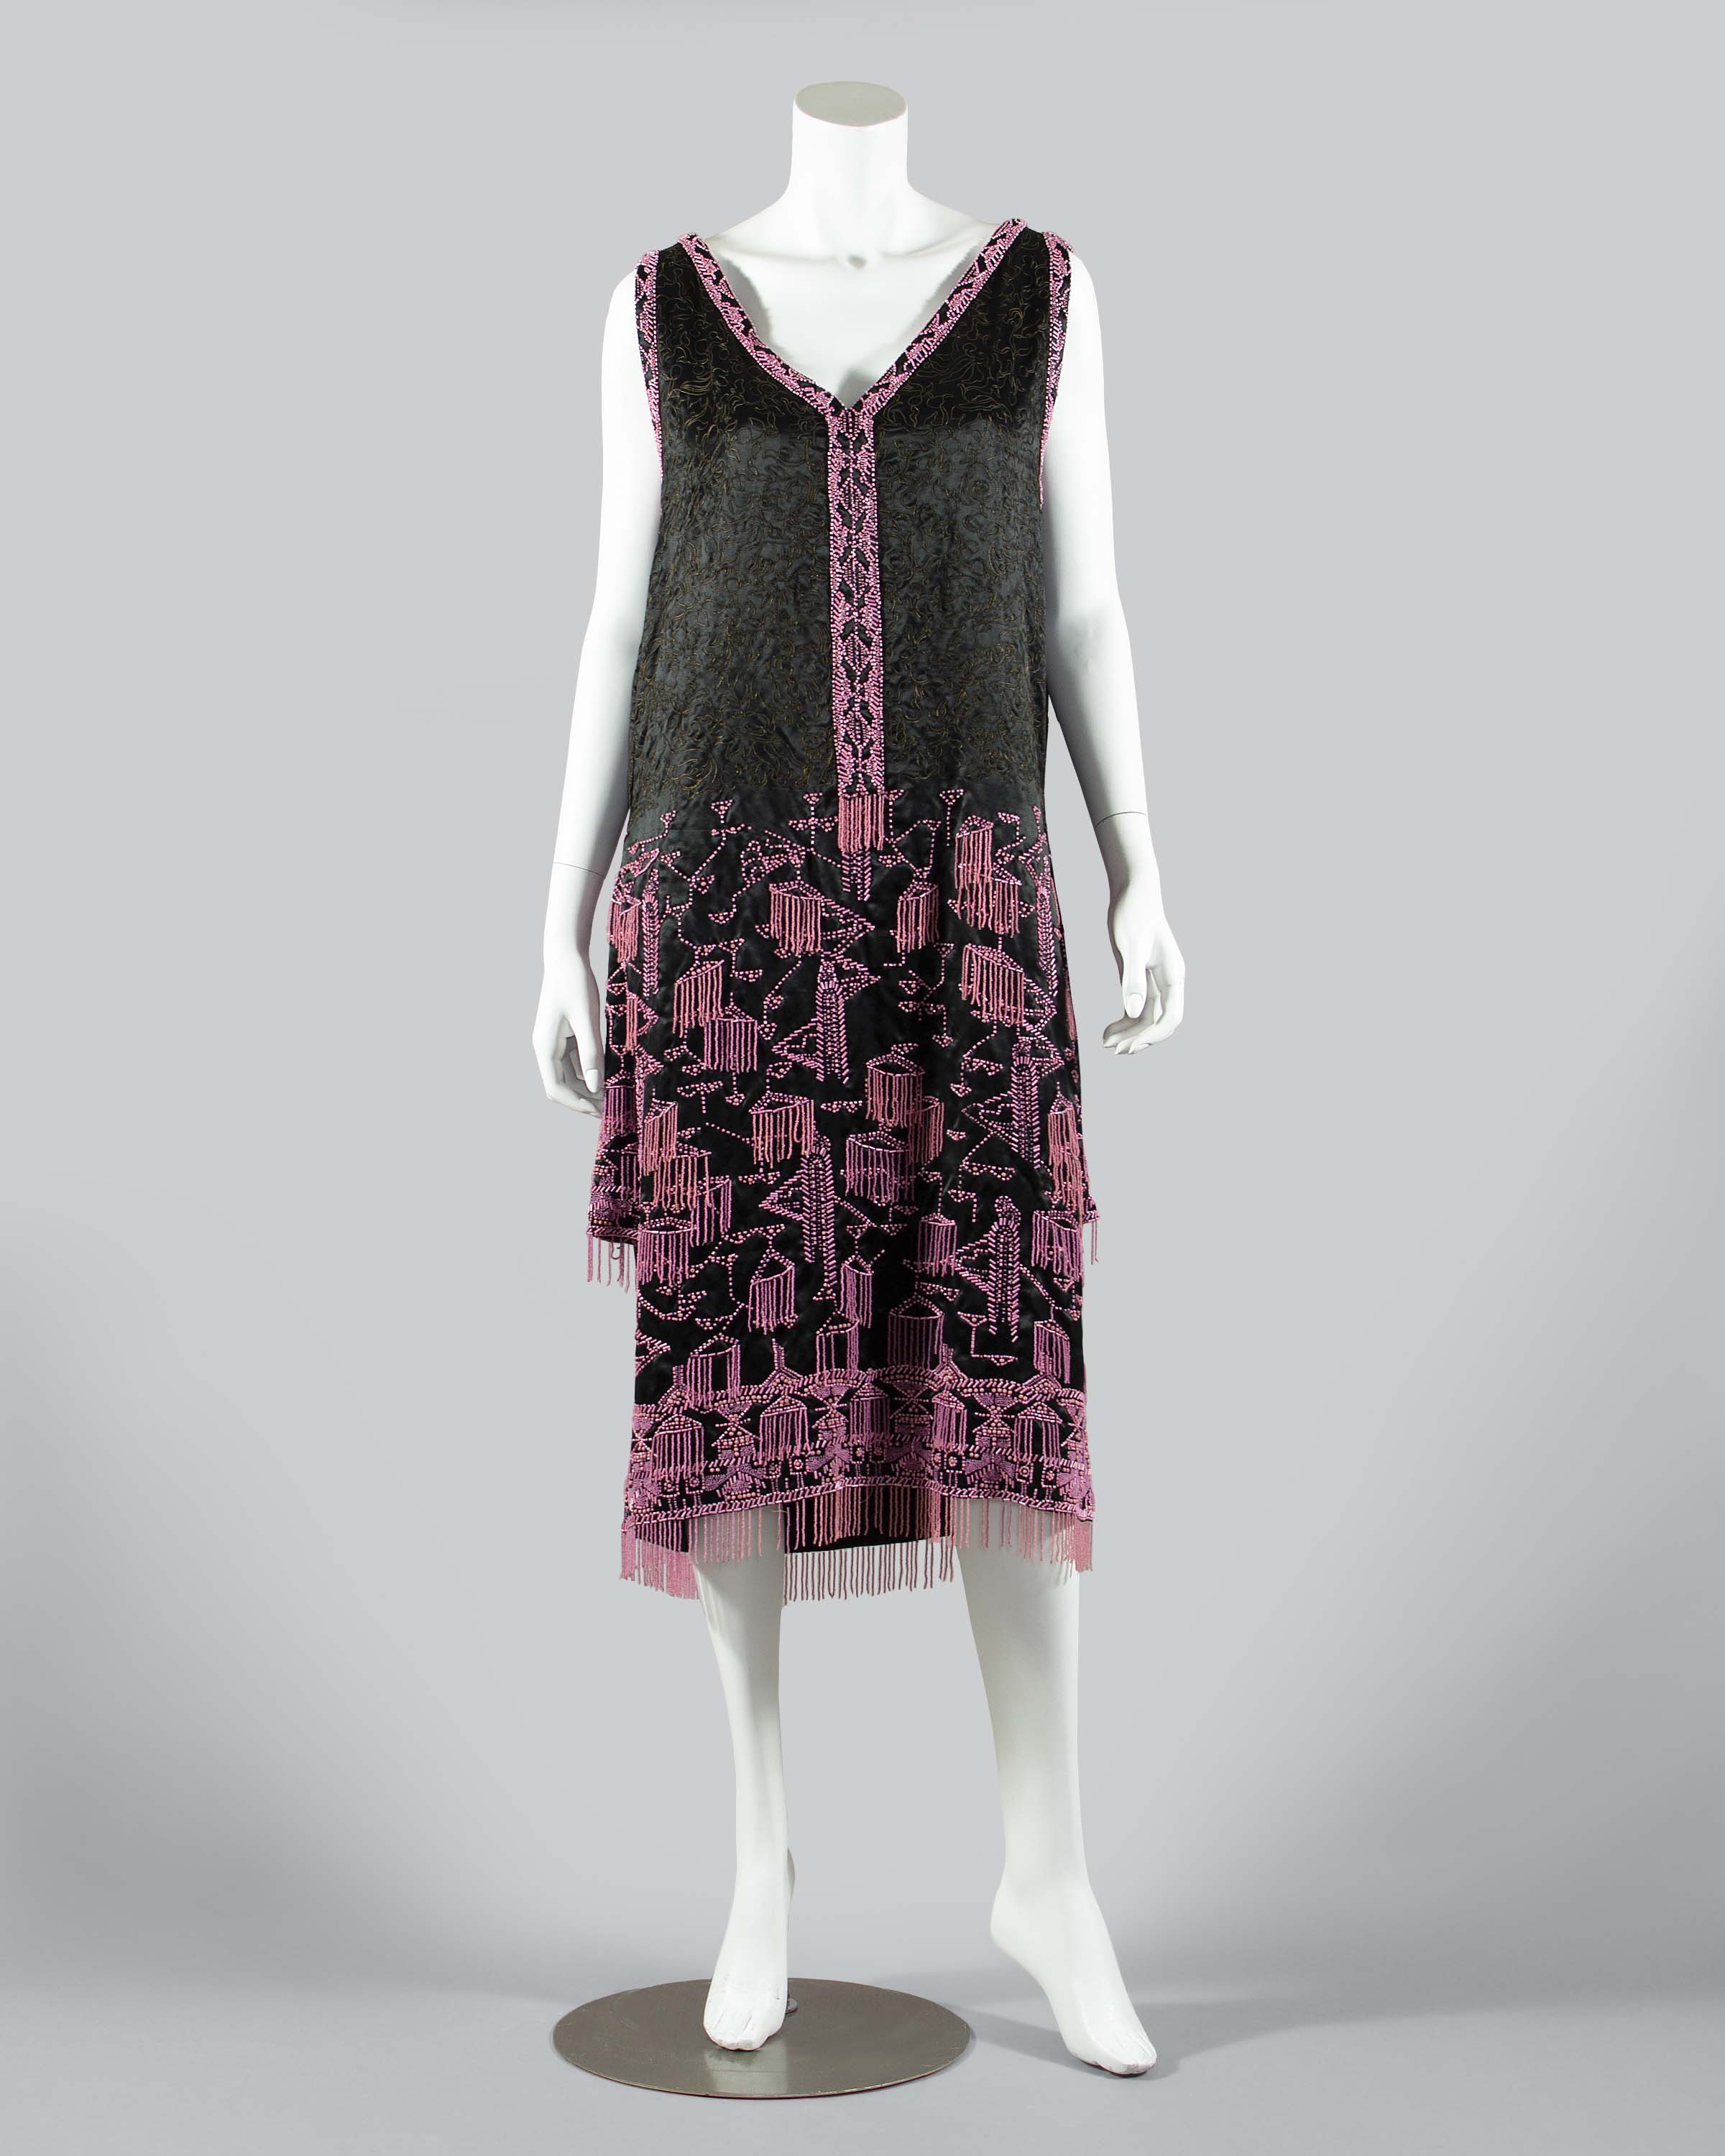 Mannequin wearing a black satin sleeveless dress embroidered with narrow gold cord and pink beads